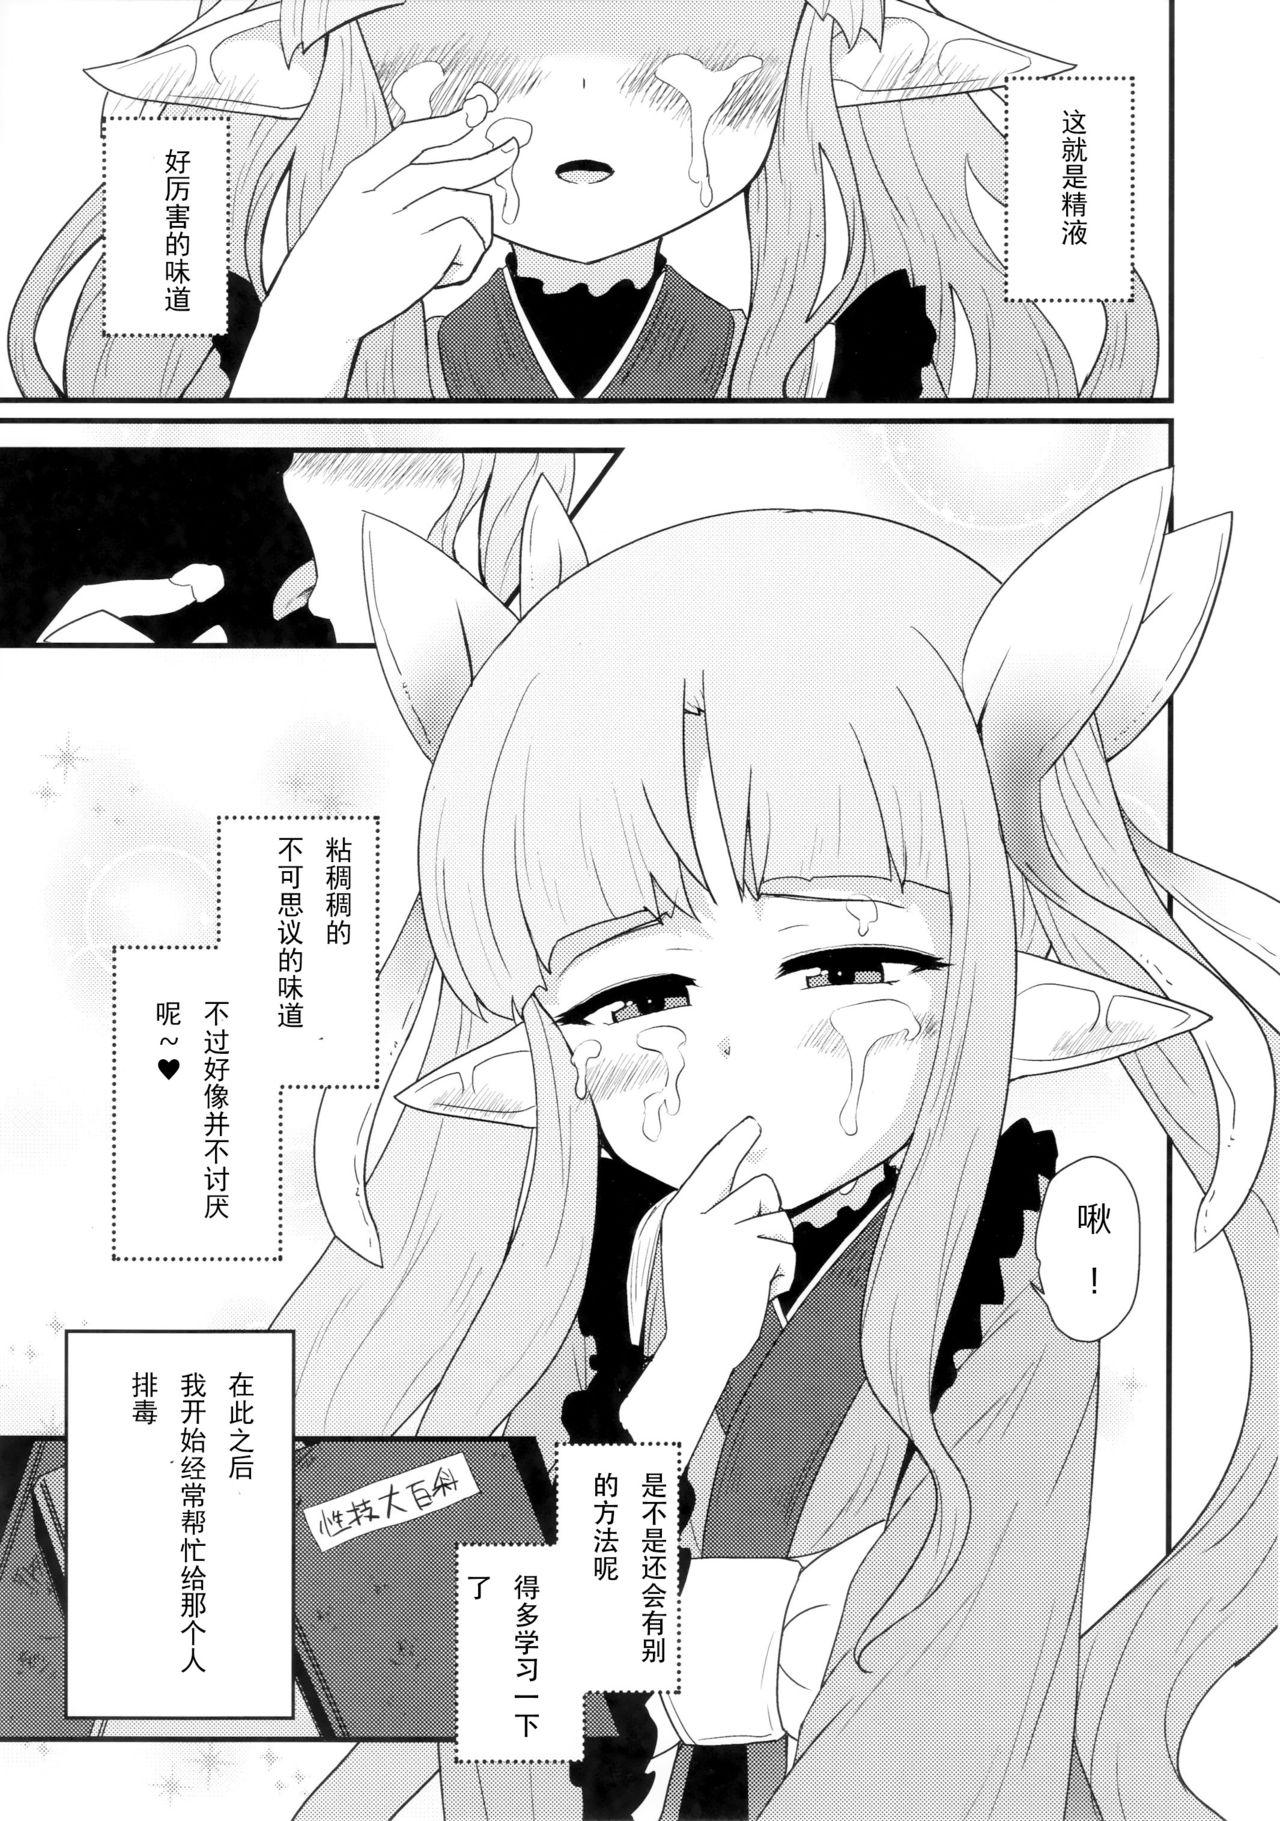 Whipping Onegai Kyouka-chan - Princess connect Voyeur - Page 6